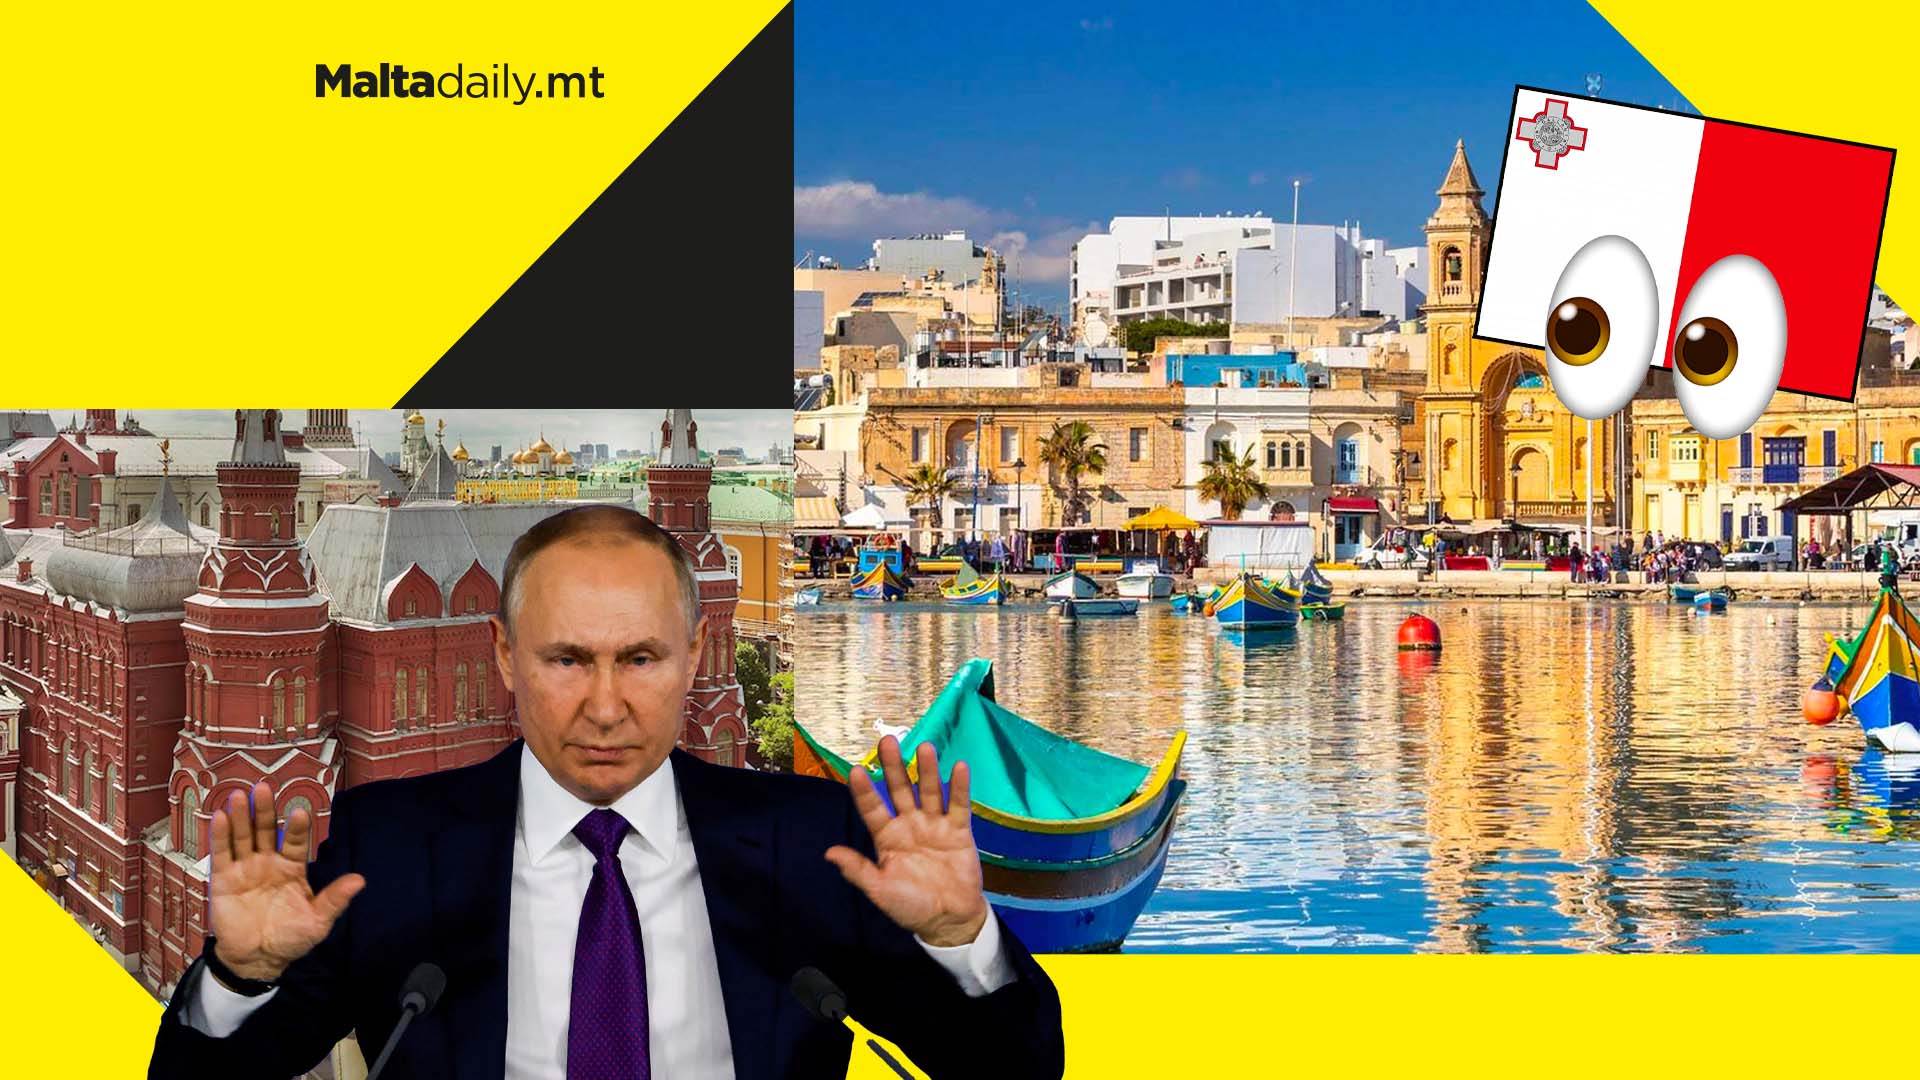 Entry into Russia has been limited for Maltese and other ‘unfriendly’ states